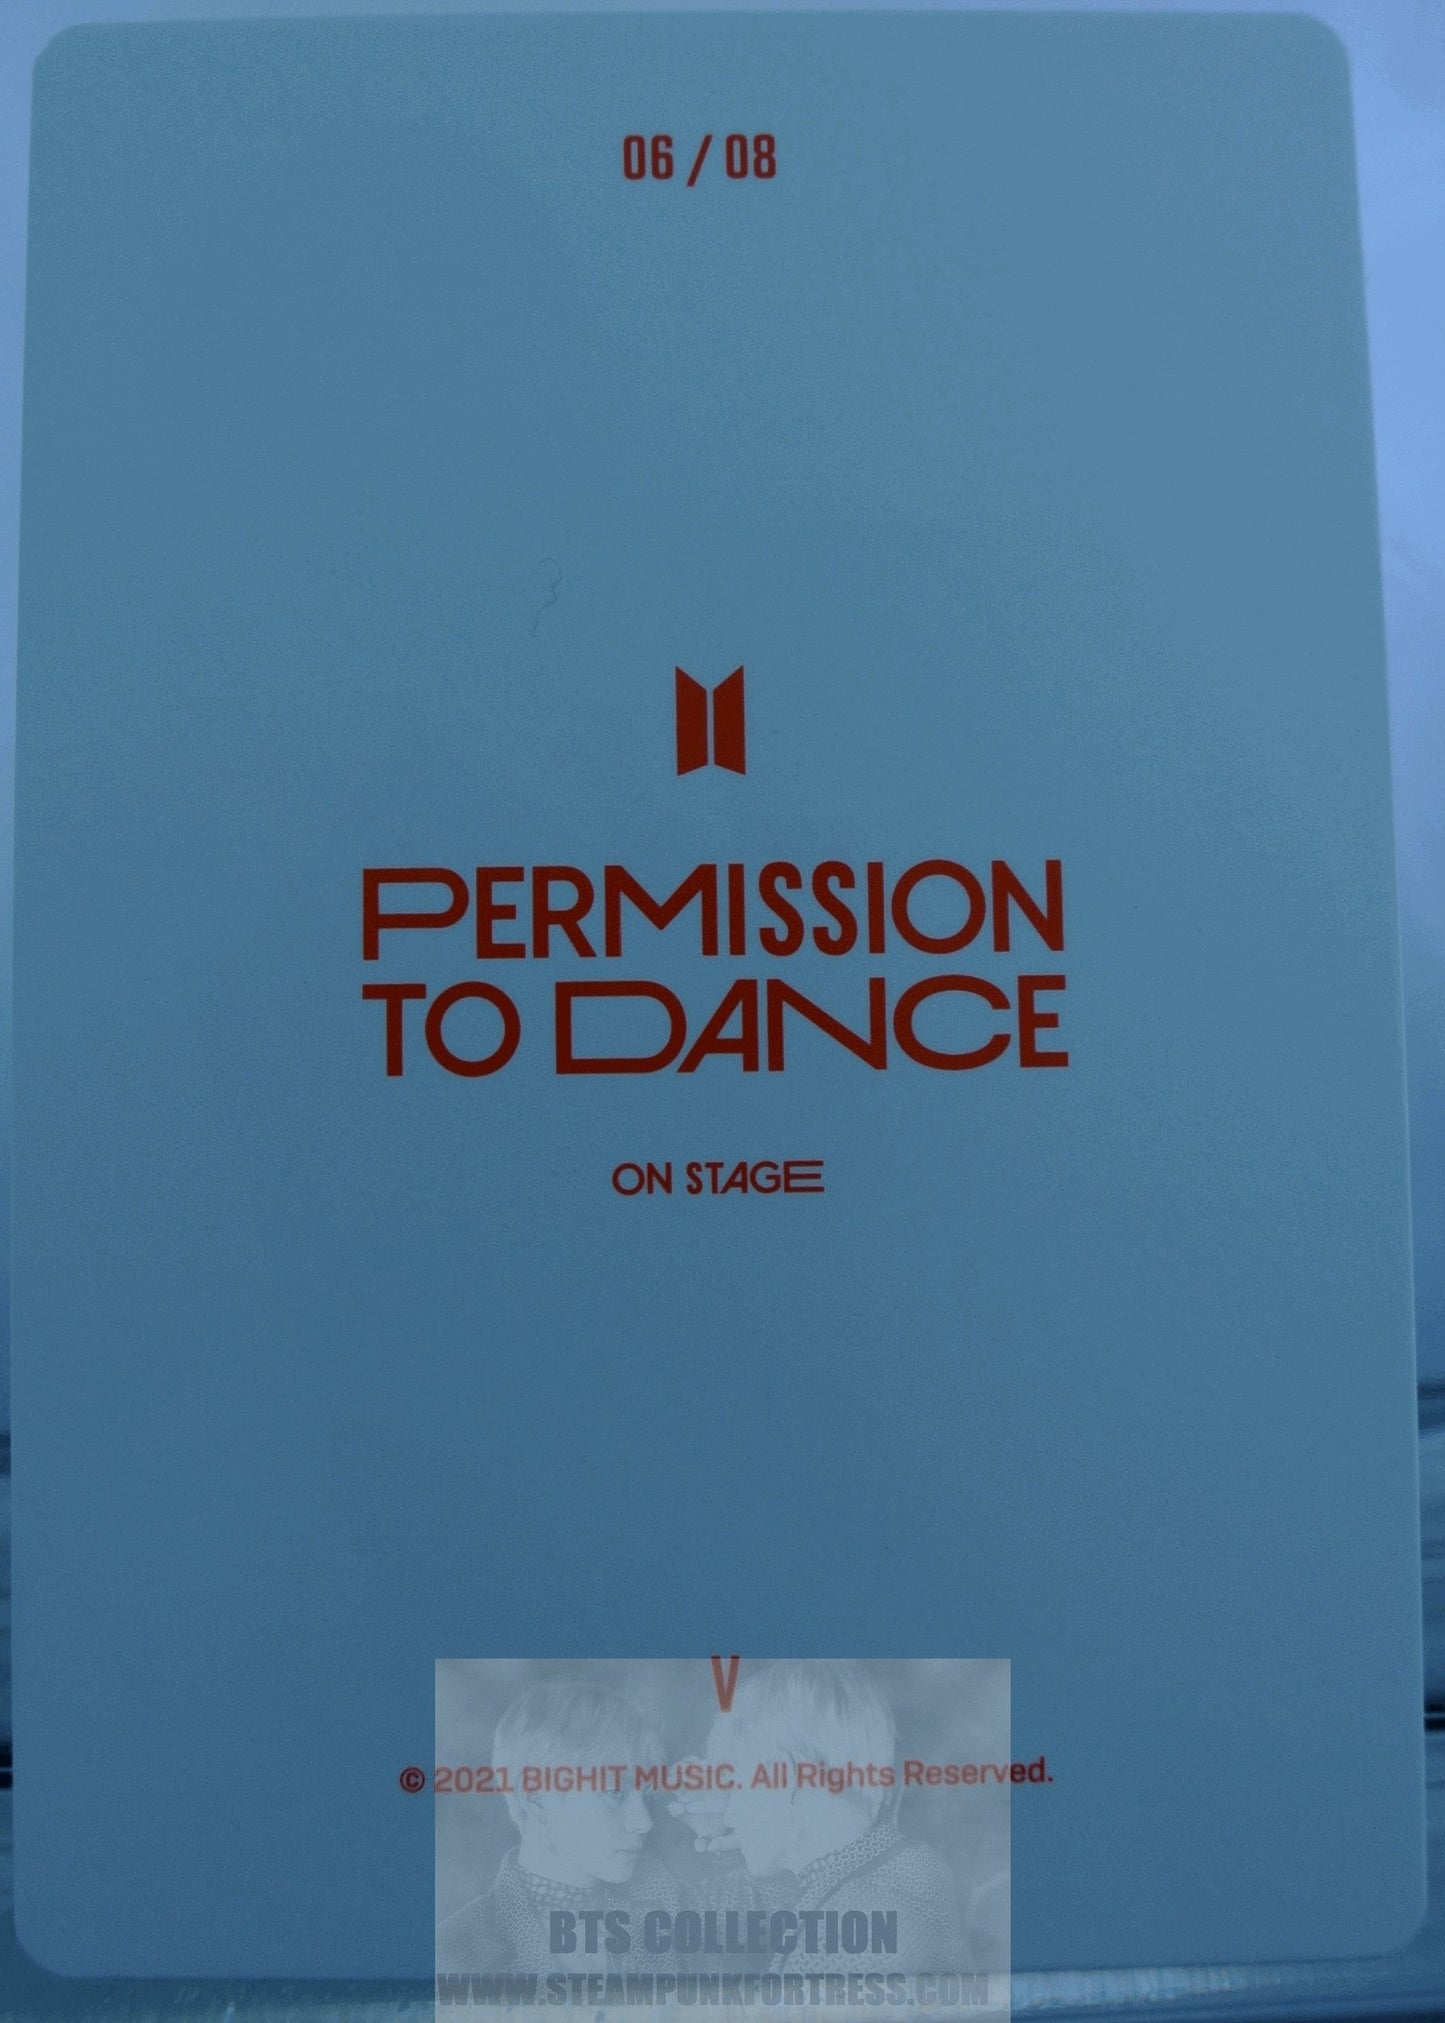 BTS V KIM TAEHYUNG TAE-HYUNG PTD 2021 PERMISSION TO DANCE ON STAGE #6 OF 8 PHOTOCARD PHOTO CARD NEW OFFICIAL MERCHANDISE